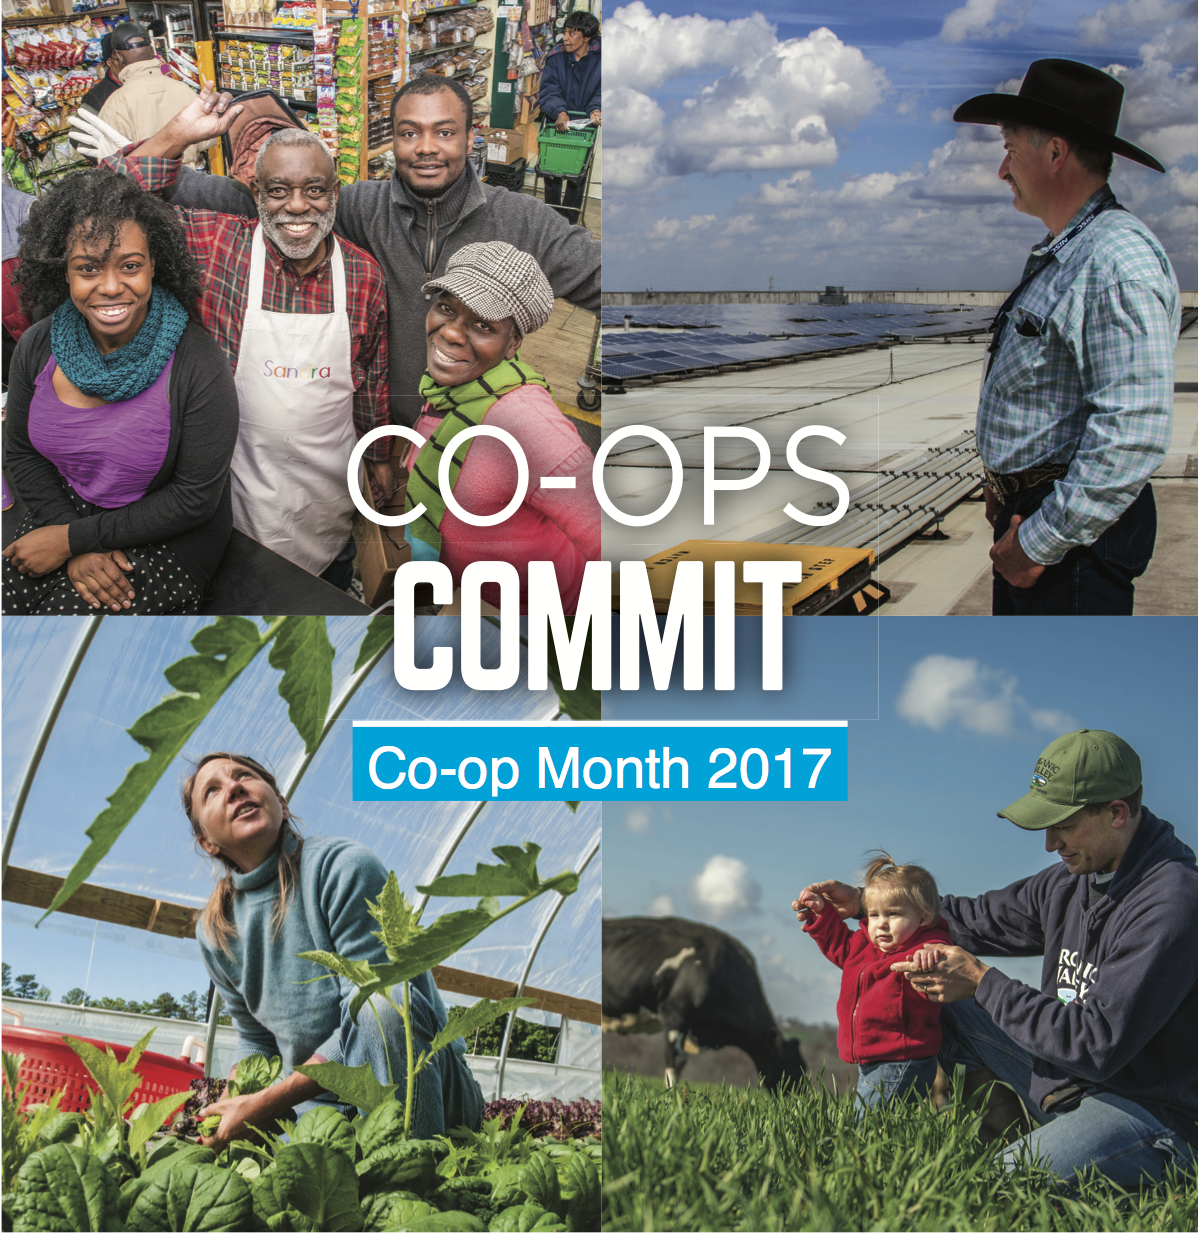 Farmers Union Celebrates National Cooperative Month